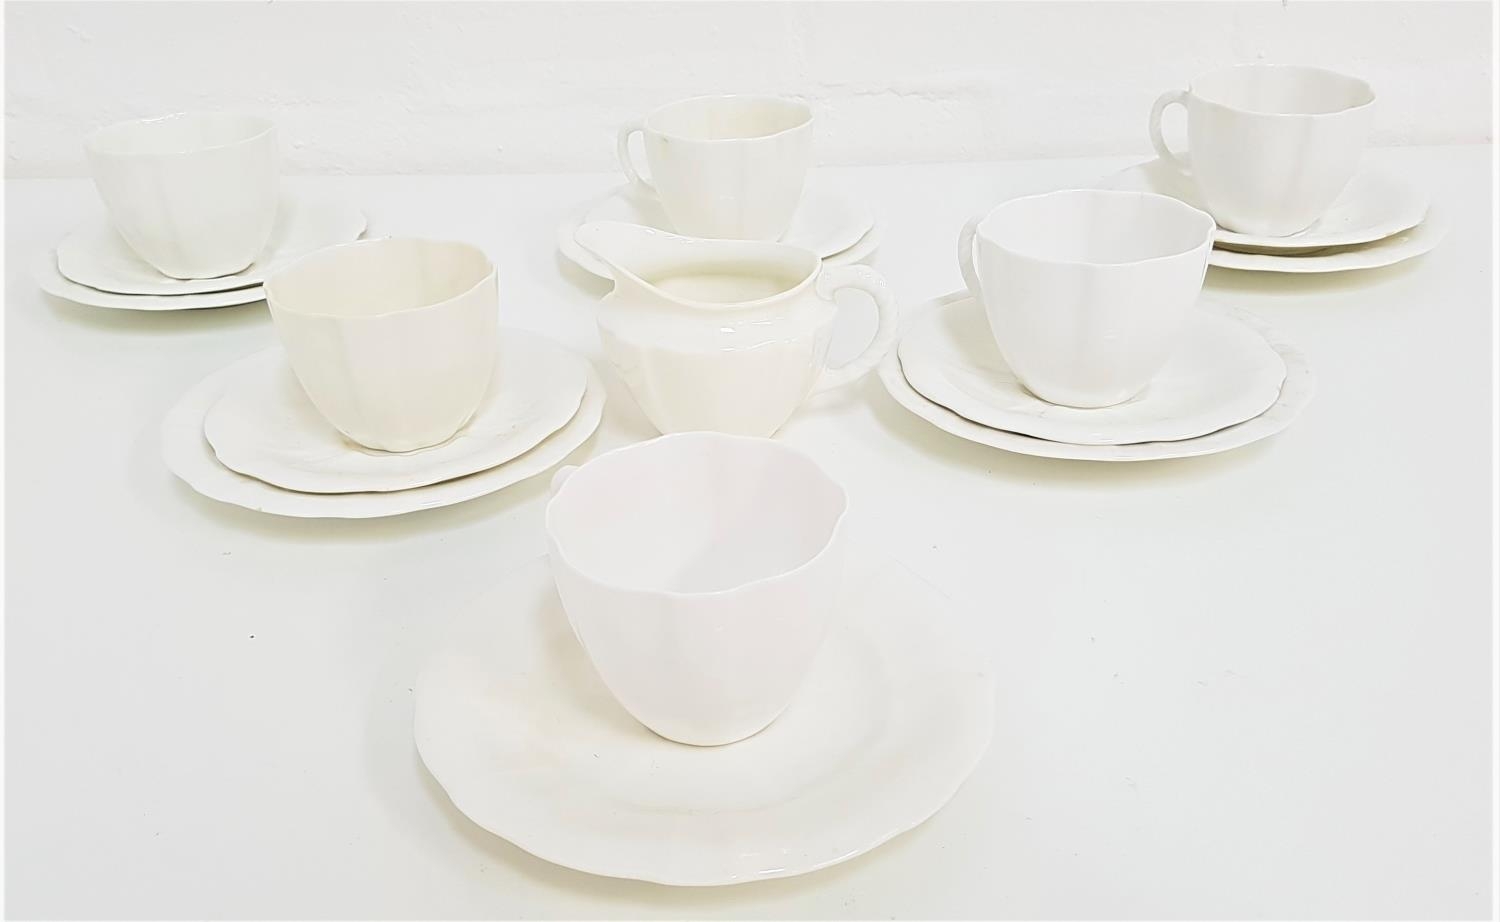 ROYAL CROWN DERBY TEA SERVICE in plain white and comprising six cups, five saucers, six side